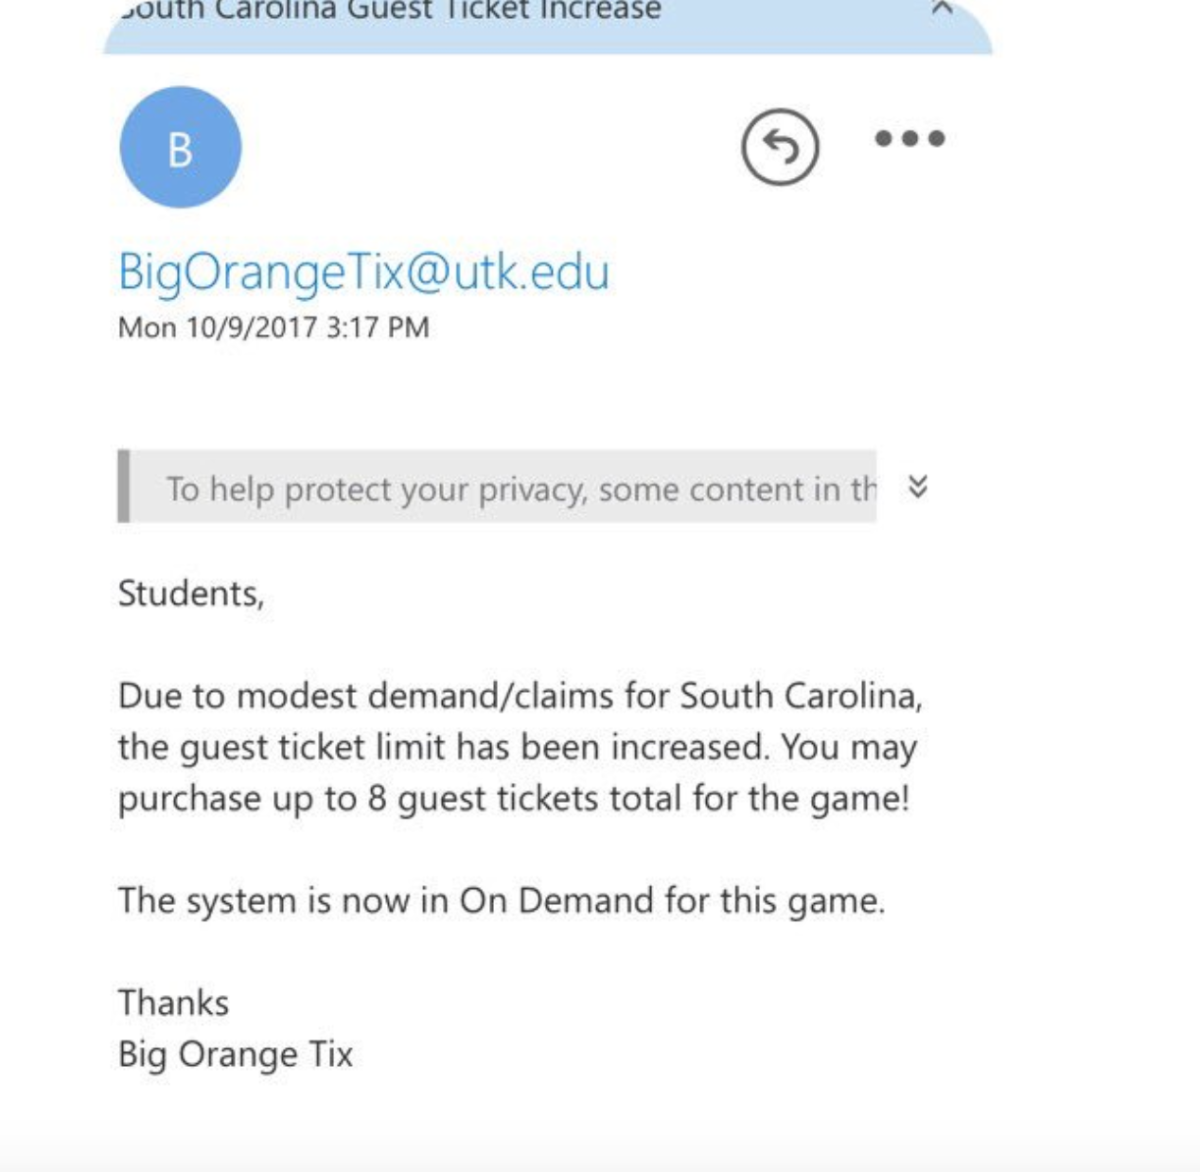 Tennessee sends email to students to increase ticket sales.